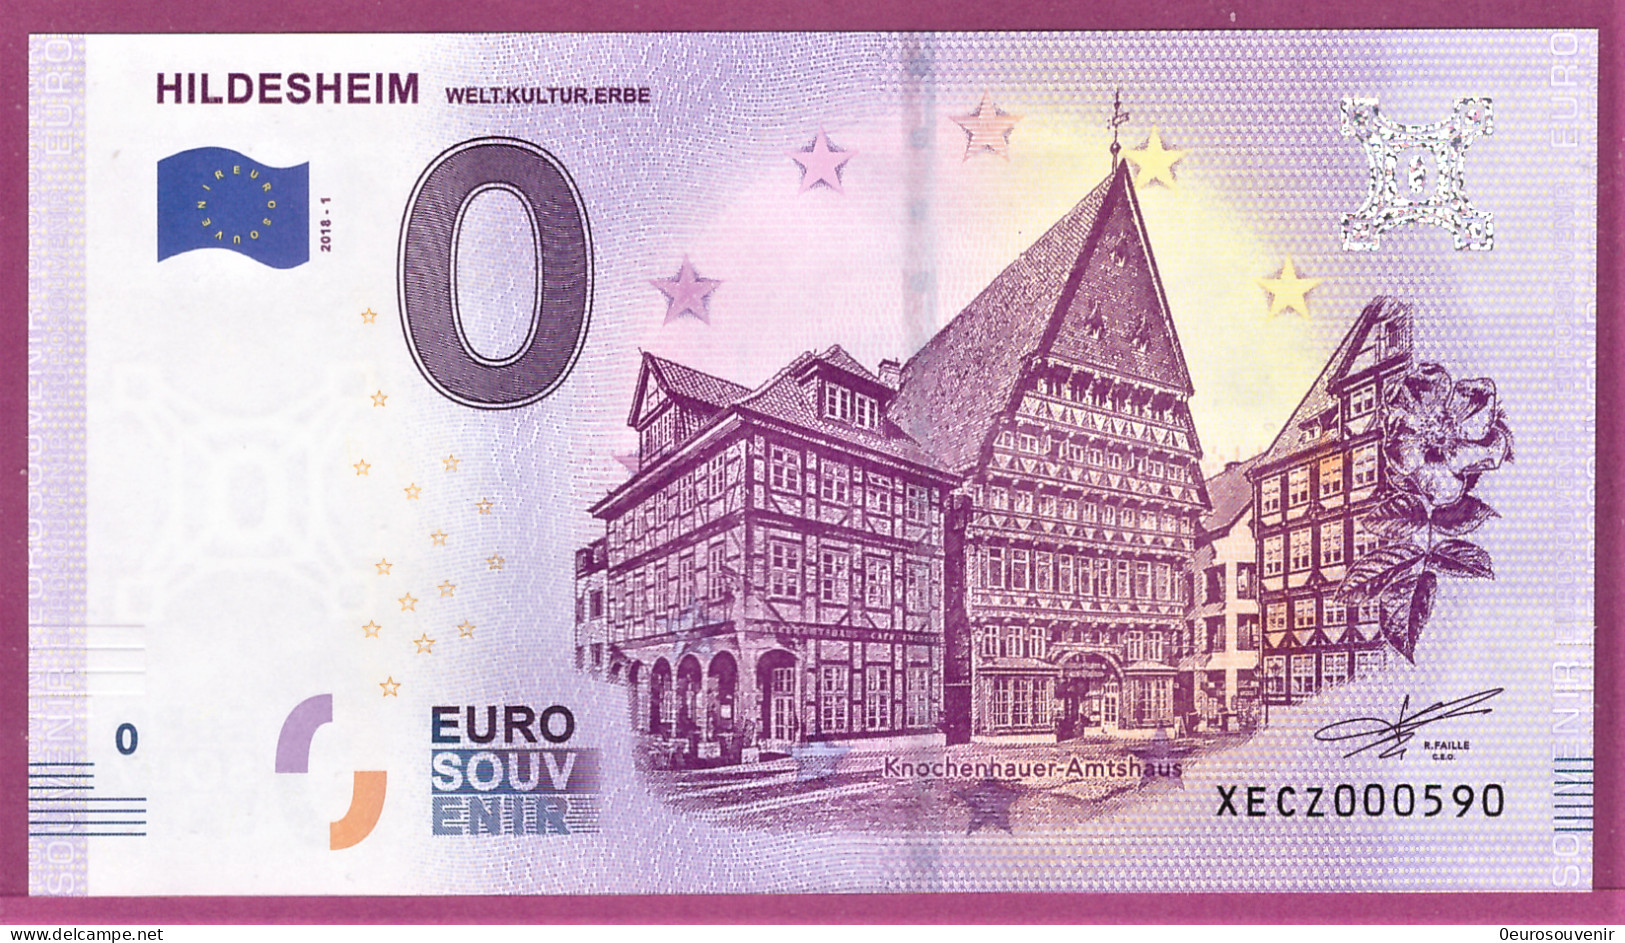 0-Euro XECZ 2018-1 HILDESHEIM - WELT.KULTUR.ERBE - Private Proofs / Unofficial